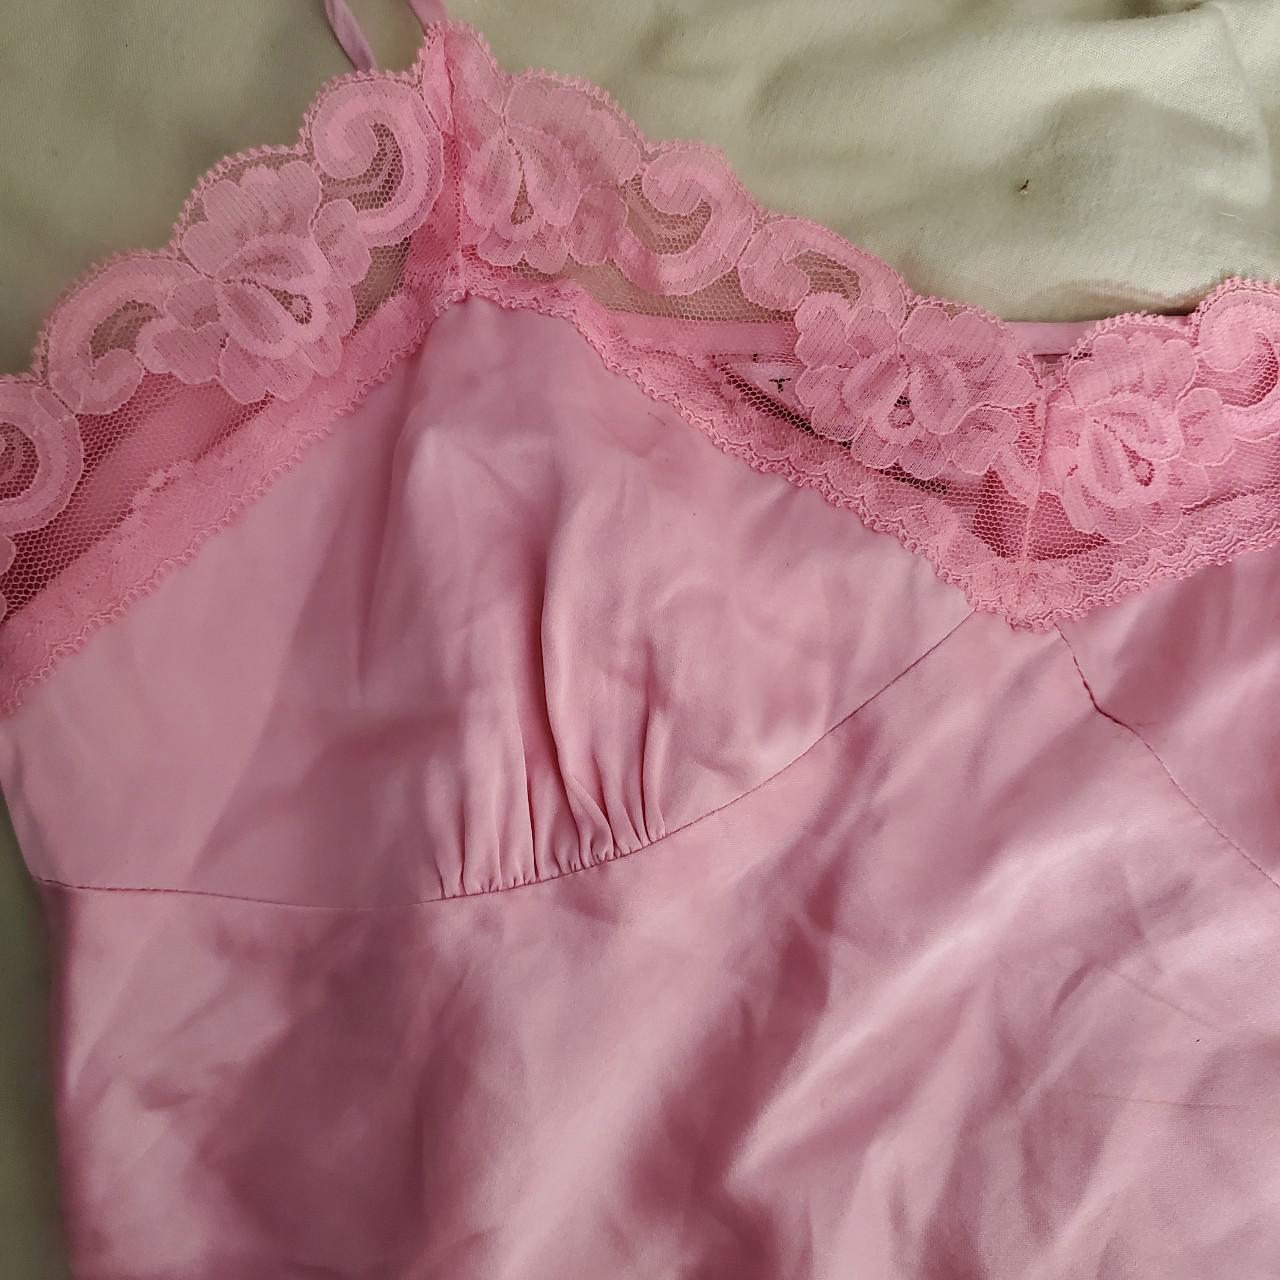 Product Image 3 - Pink with lace cami top